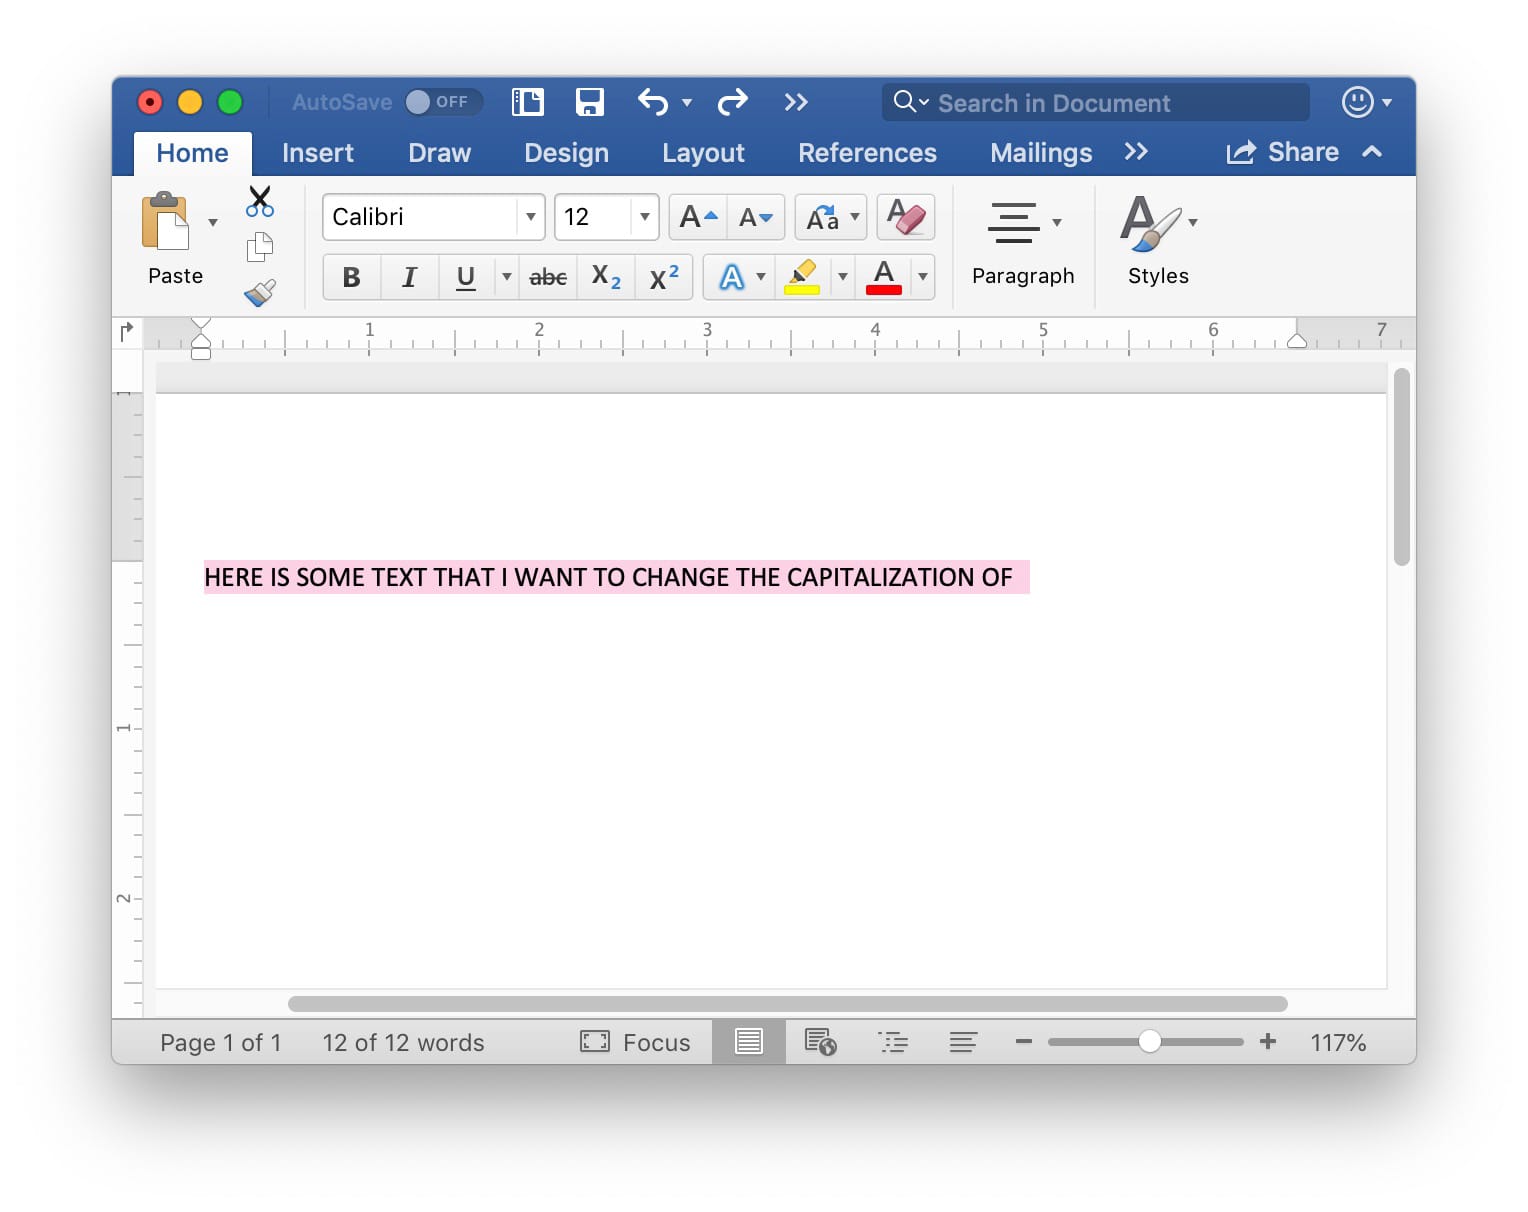 2018 ms word for mac